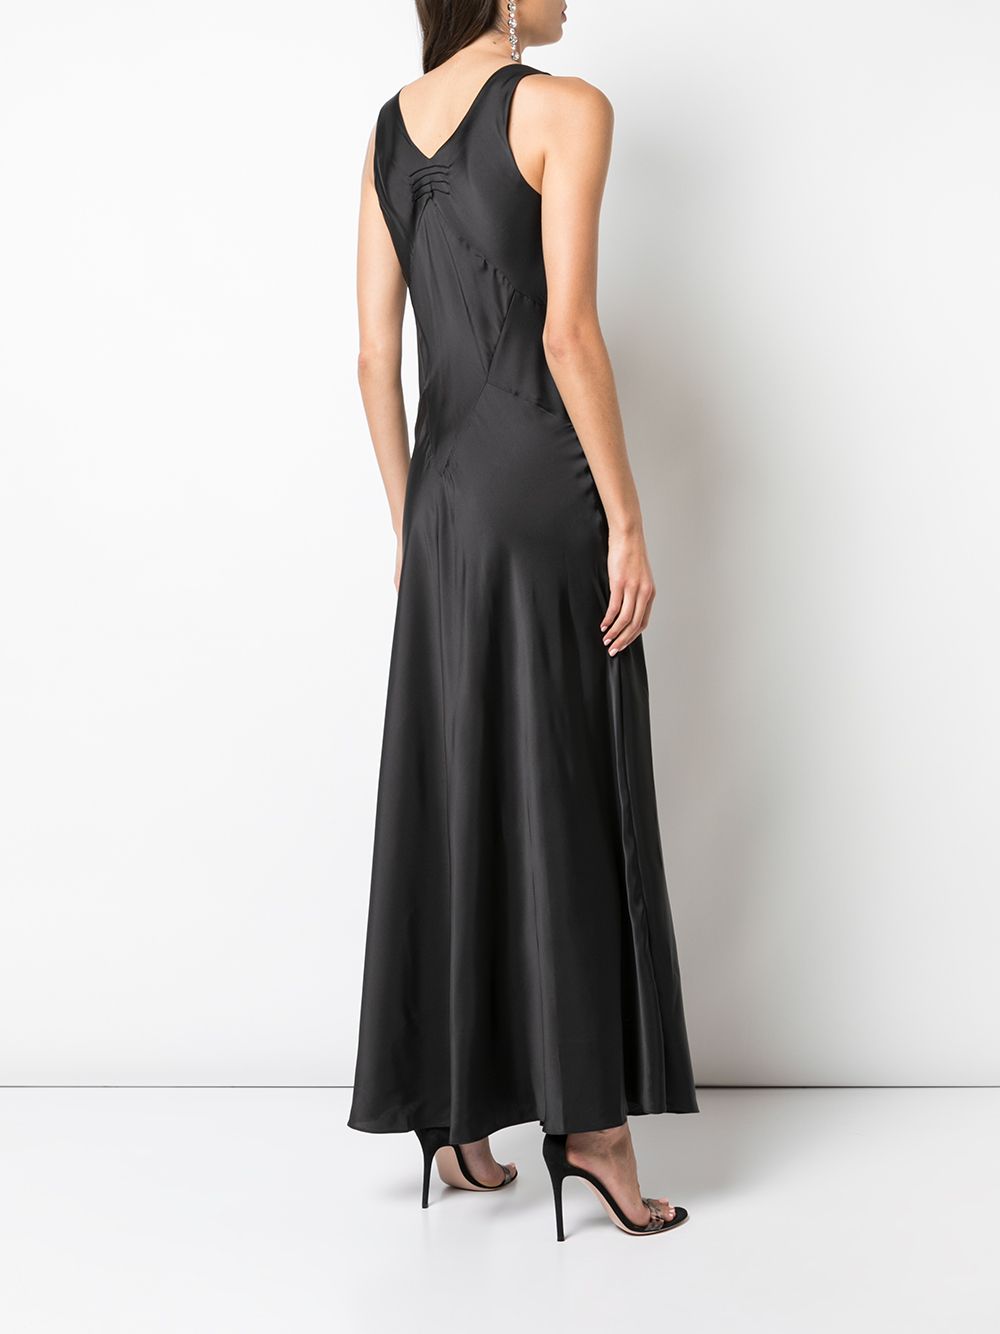 Shop Paco Rabanne Light Satin dress with Express Delivery - FARFETCH